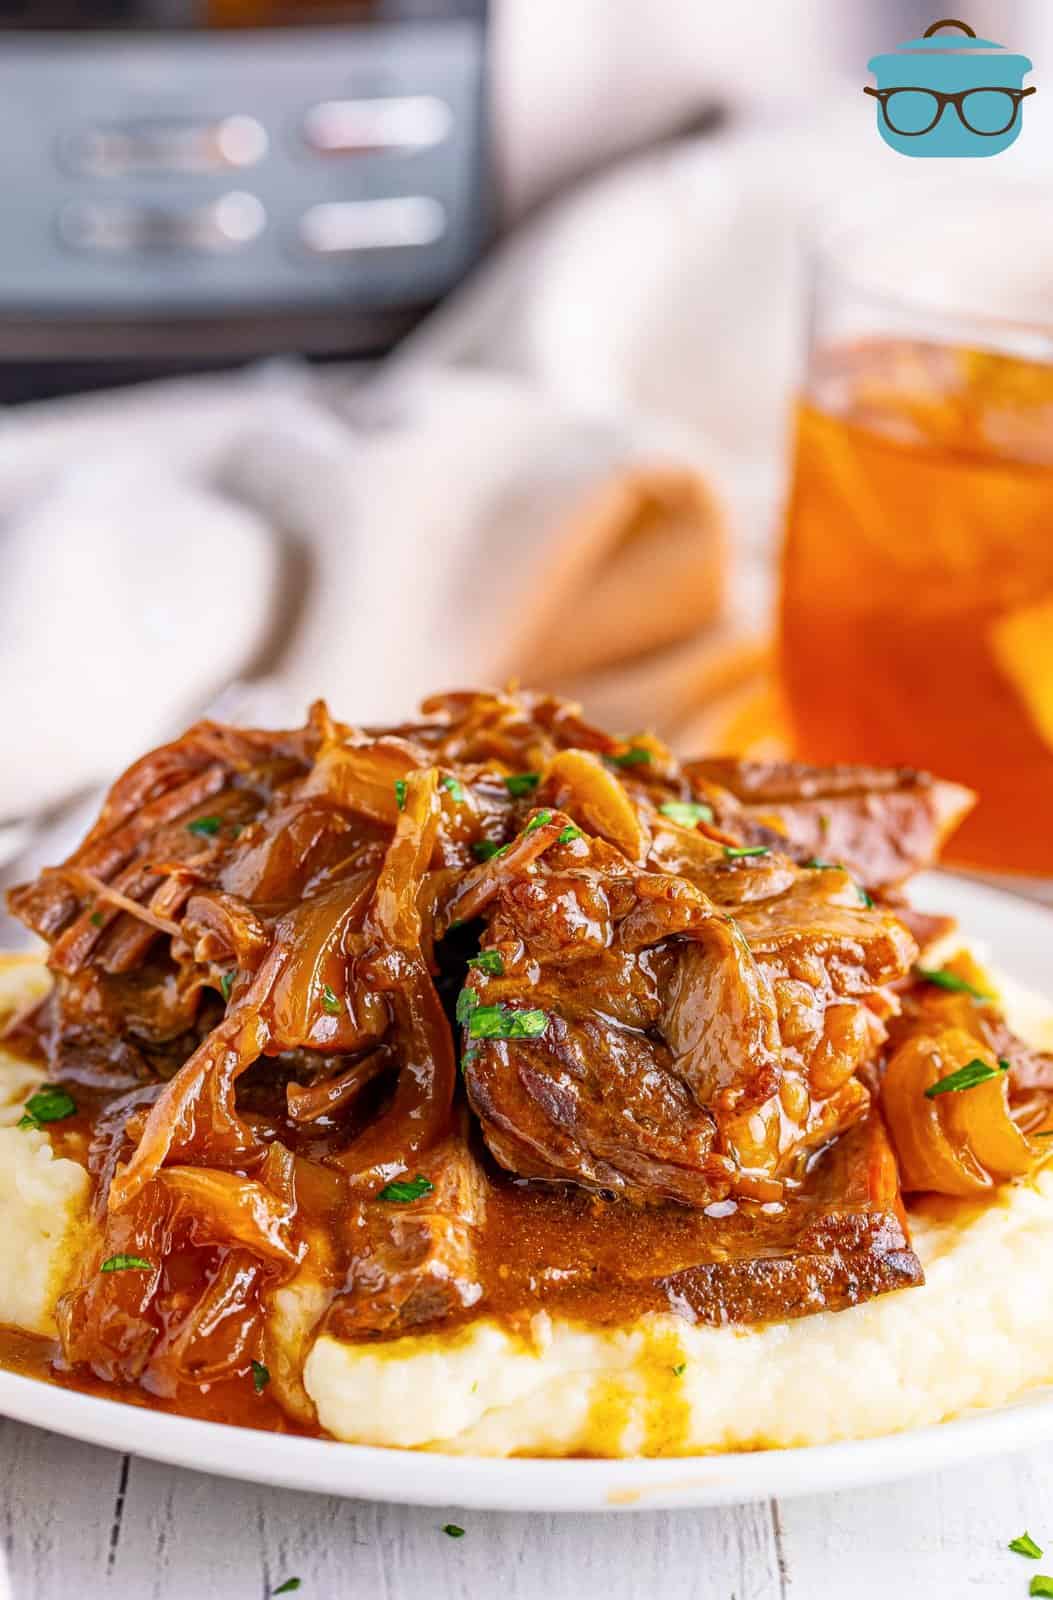 A serving of Slow Cooker French Onion Pot Roast over a bed of mashed potatoes on a plate.